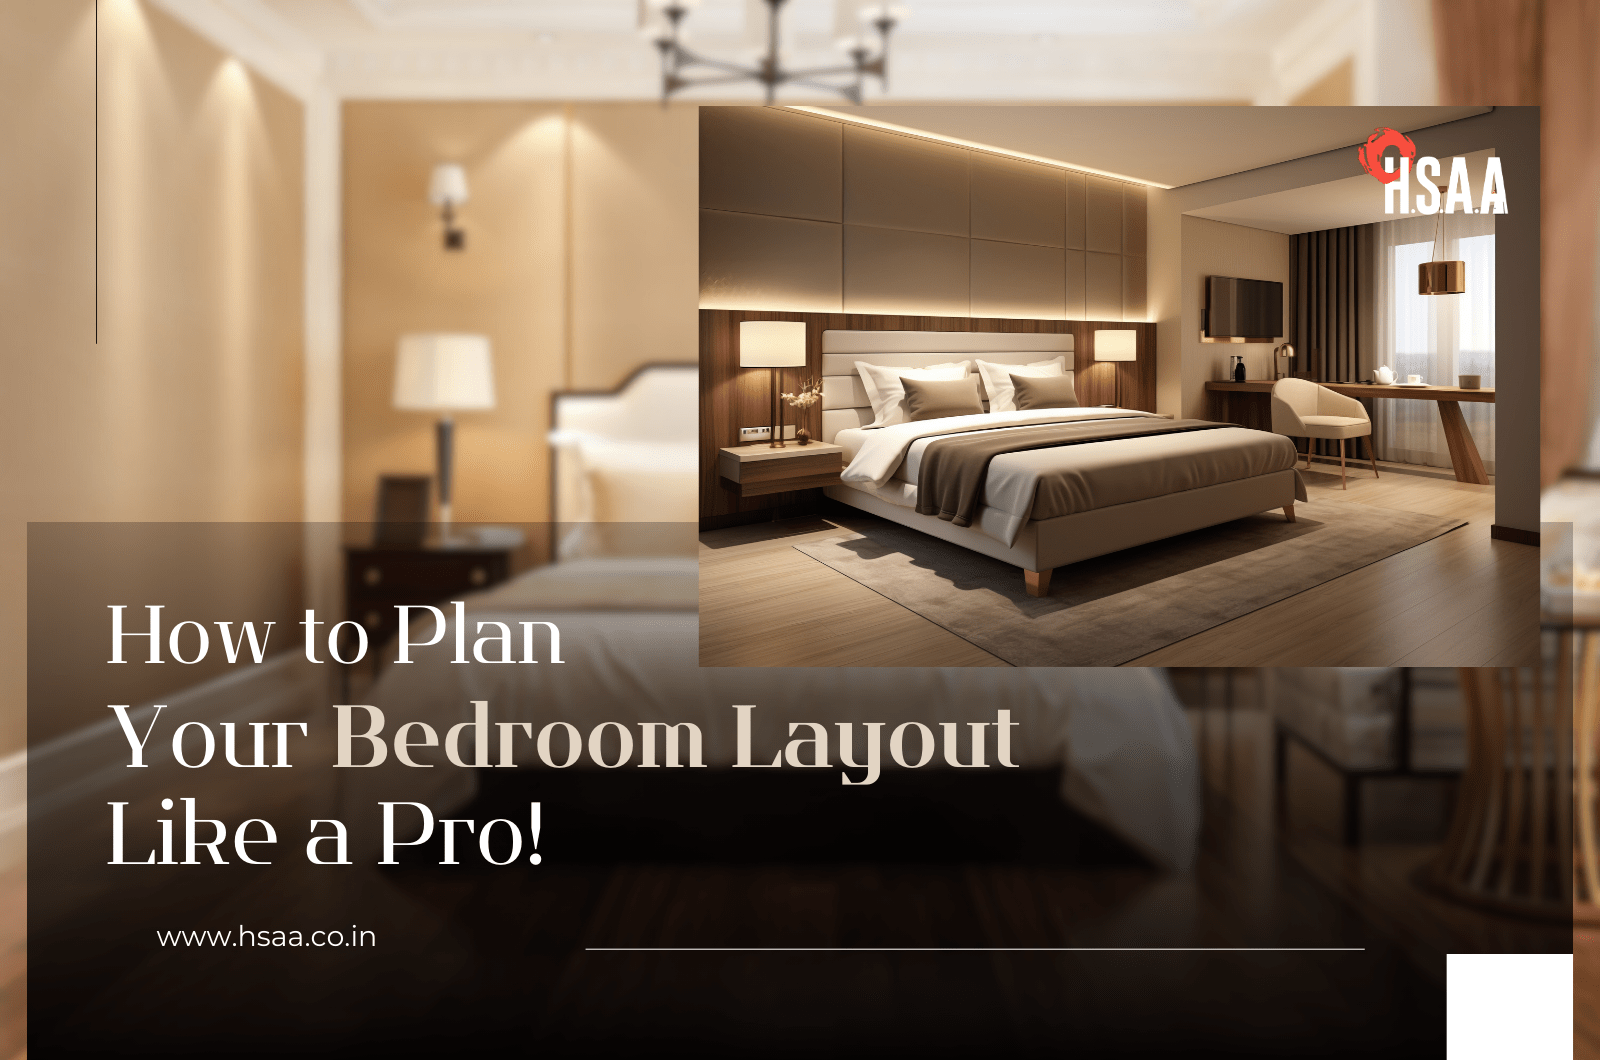 How to Plan Your Bedroom Layout Like a Pro!